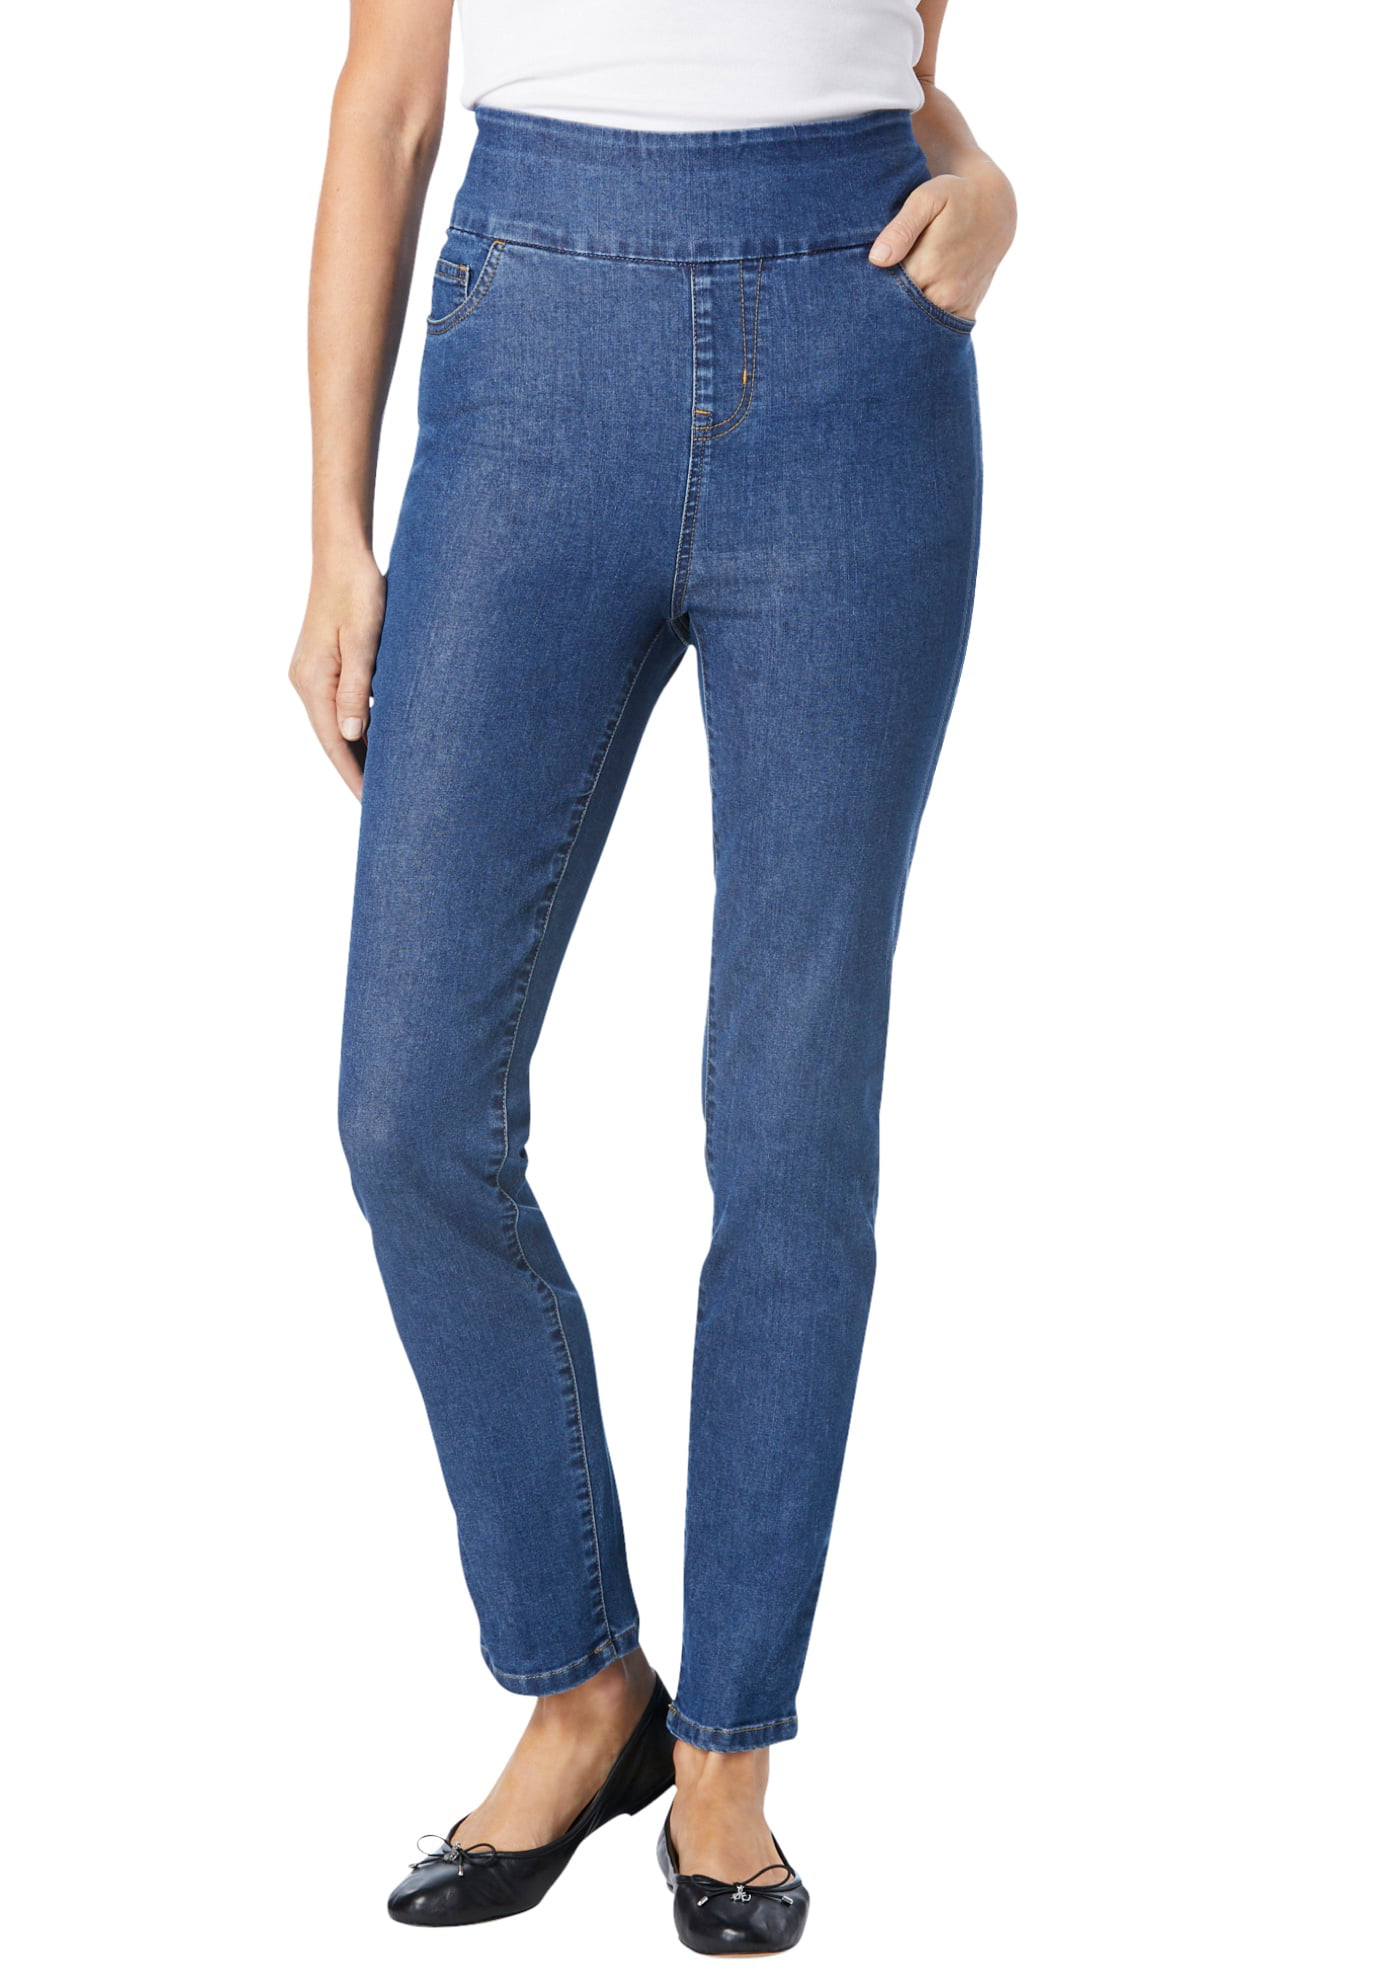 Woman Within - Woman Within Women's Plus Size Tall Pull-On Skinny Jean ...